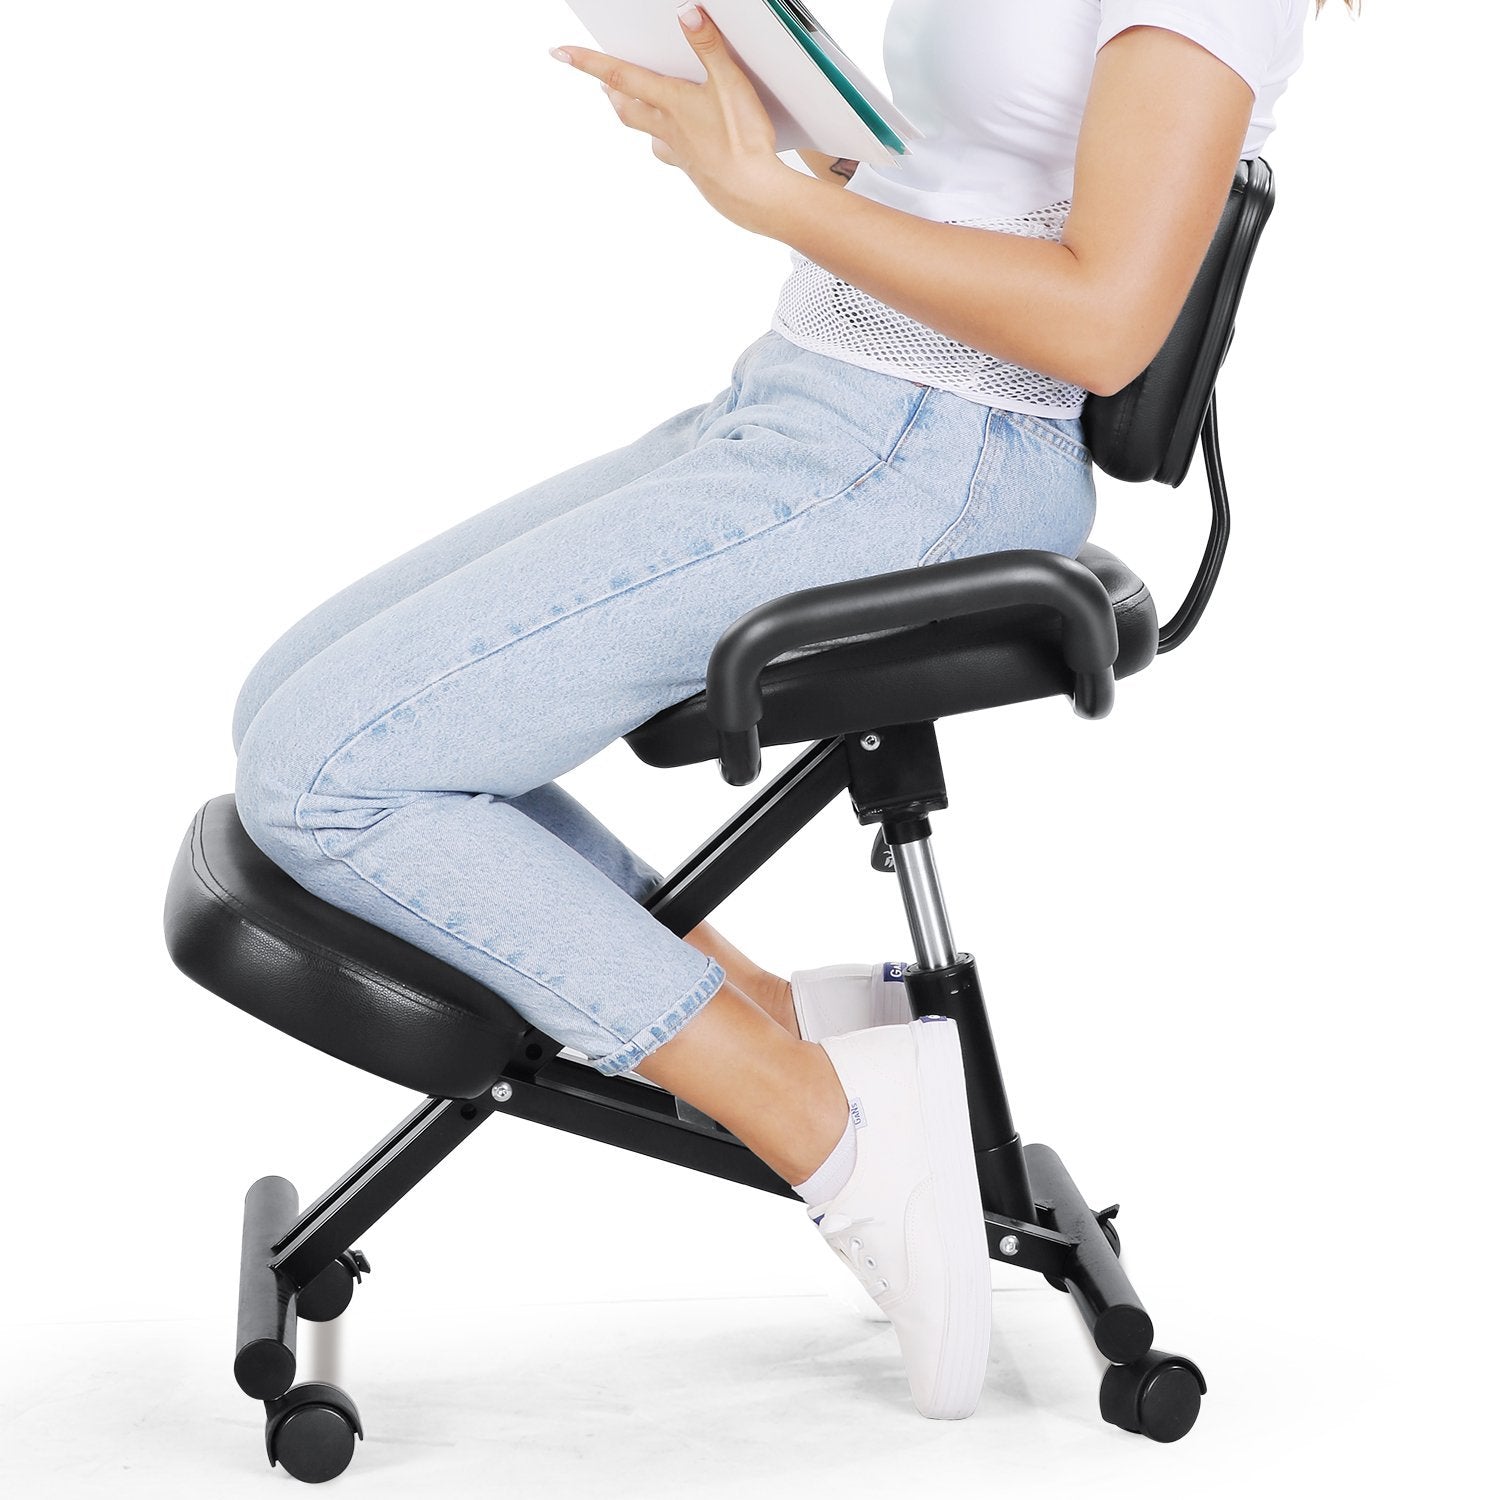 http://www.maxkare.net/cdn/shop/products/maxkare-ergonomic-kneeling-chair-office-home-chair-with-adjustable-height-for-posture-correct-bad-backs-neck-pain-relieving-spine-tension-relief-thick-comfortab-276452.jpg?v=1626676312